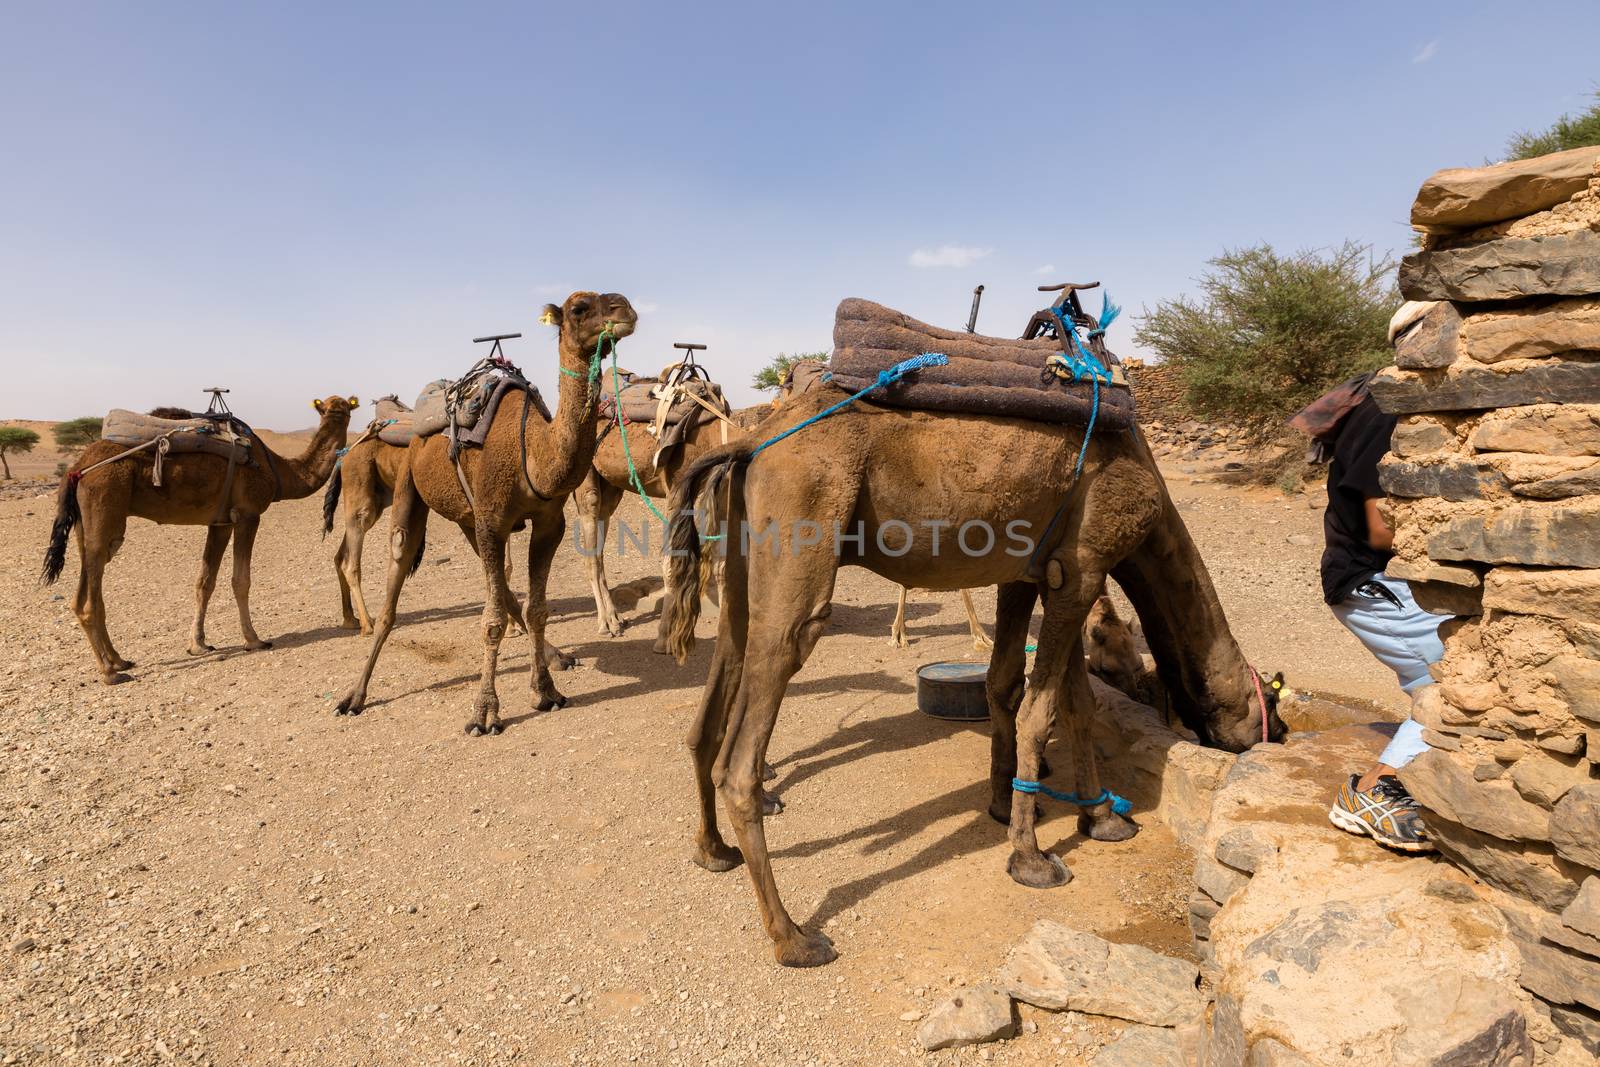 camels drink water from the well by Mieszko9